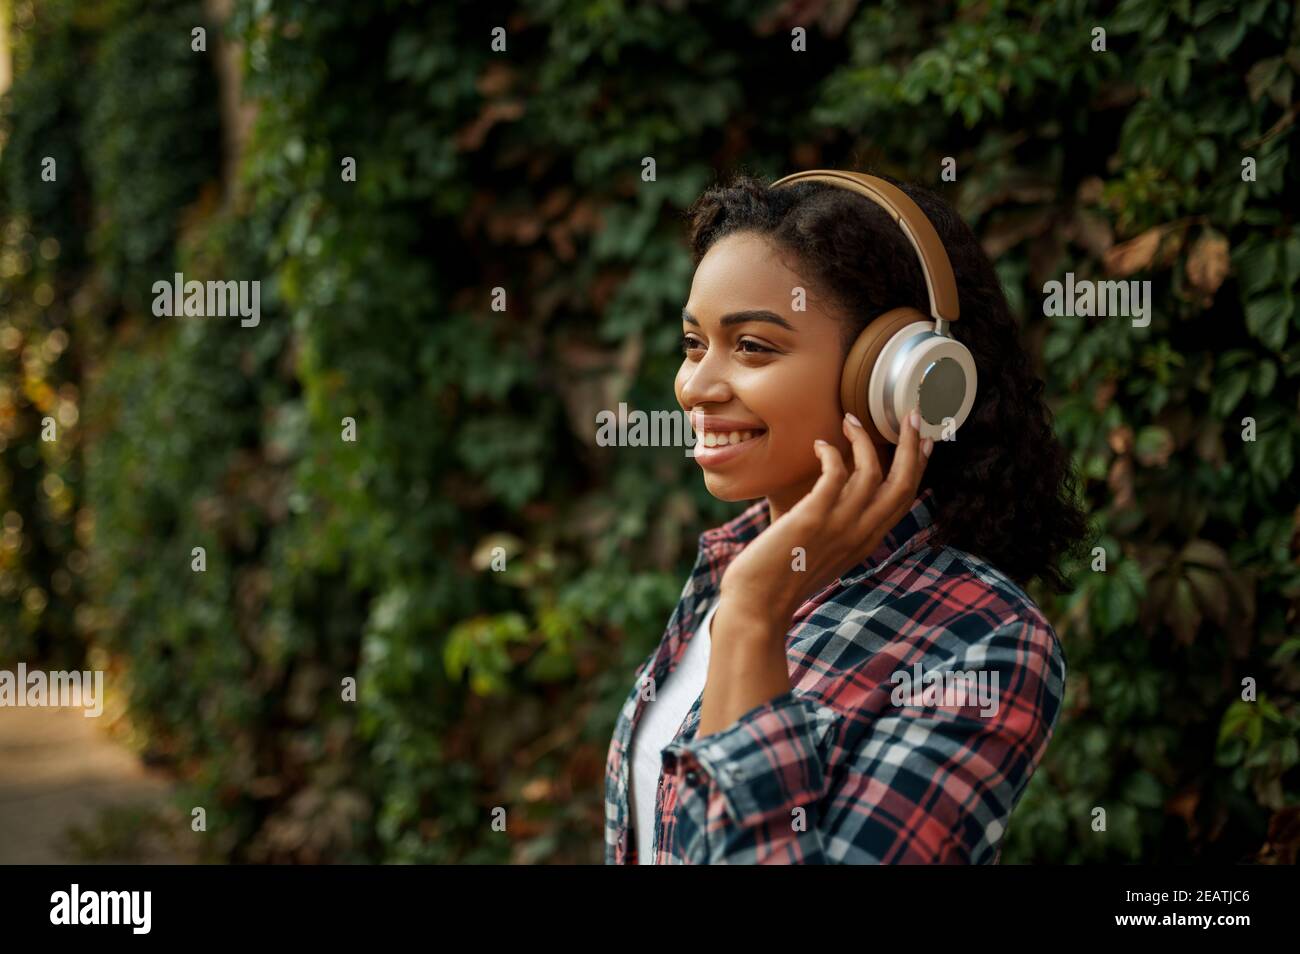 Woman in headphones listening to music in park Stock Photo